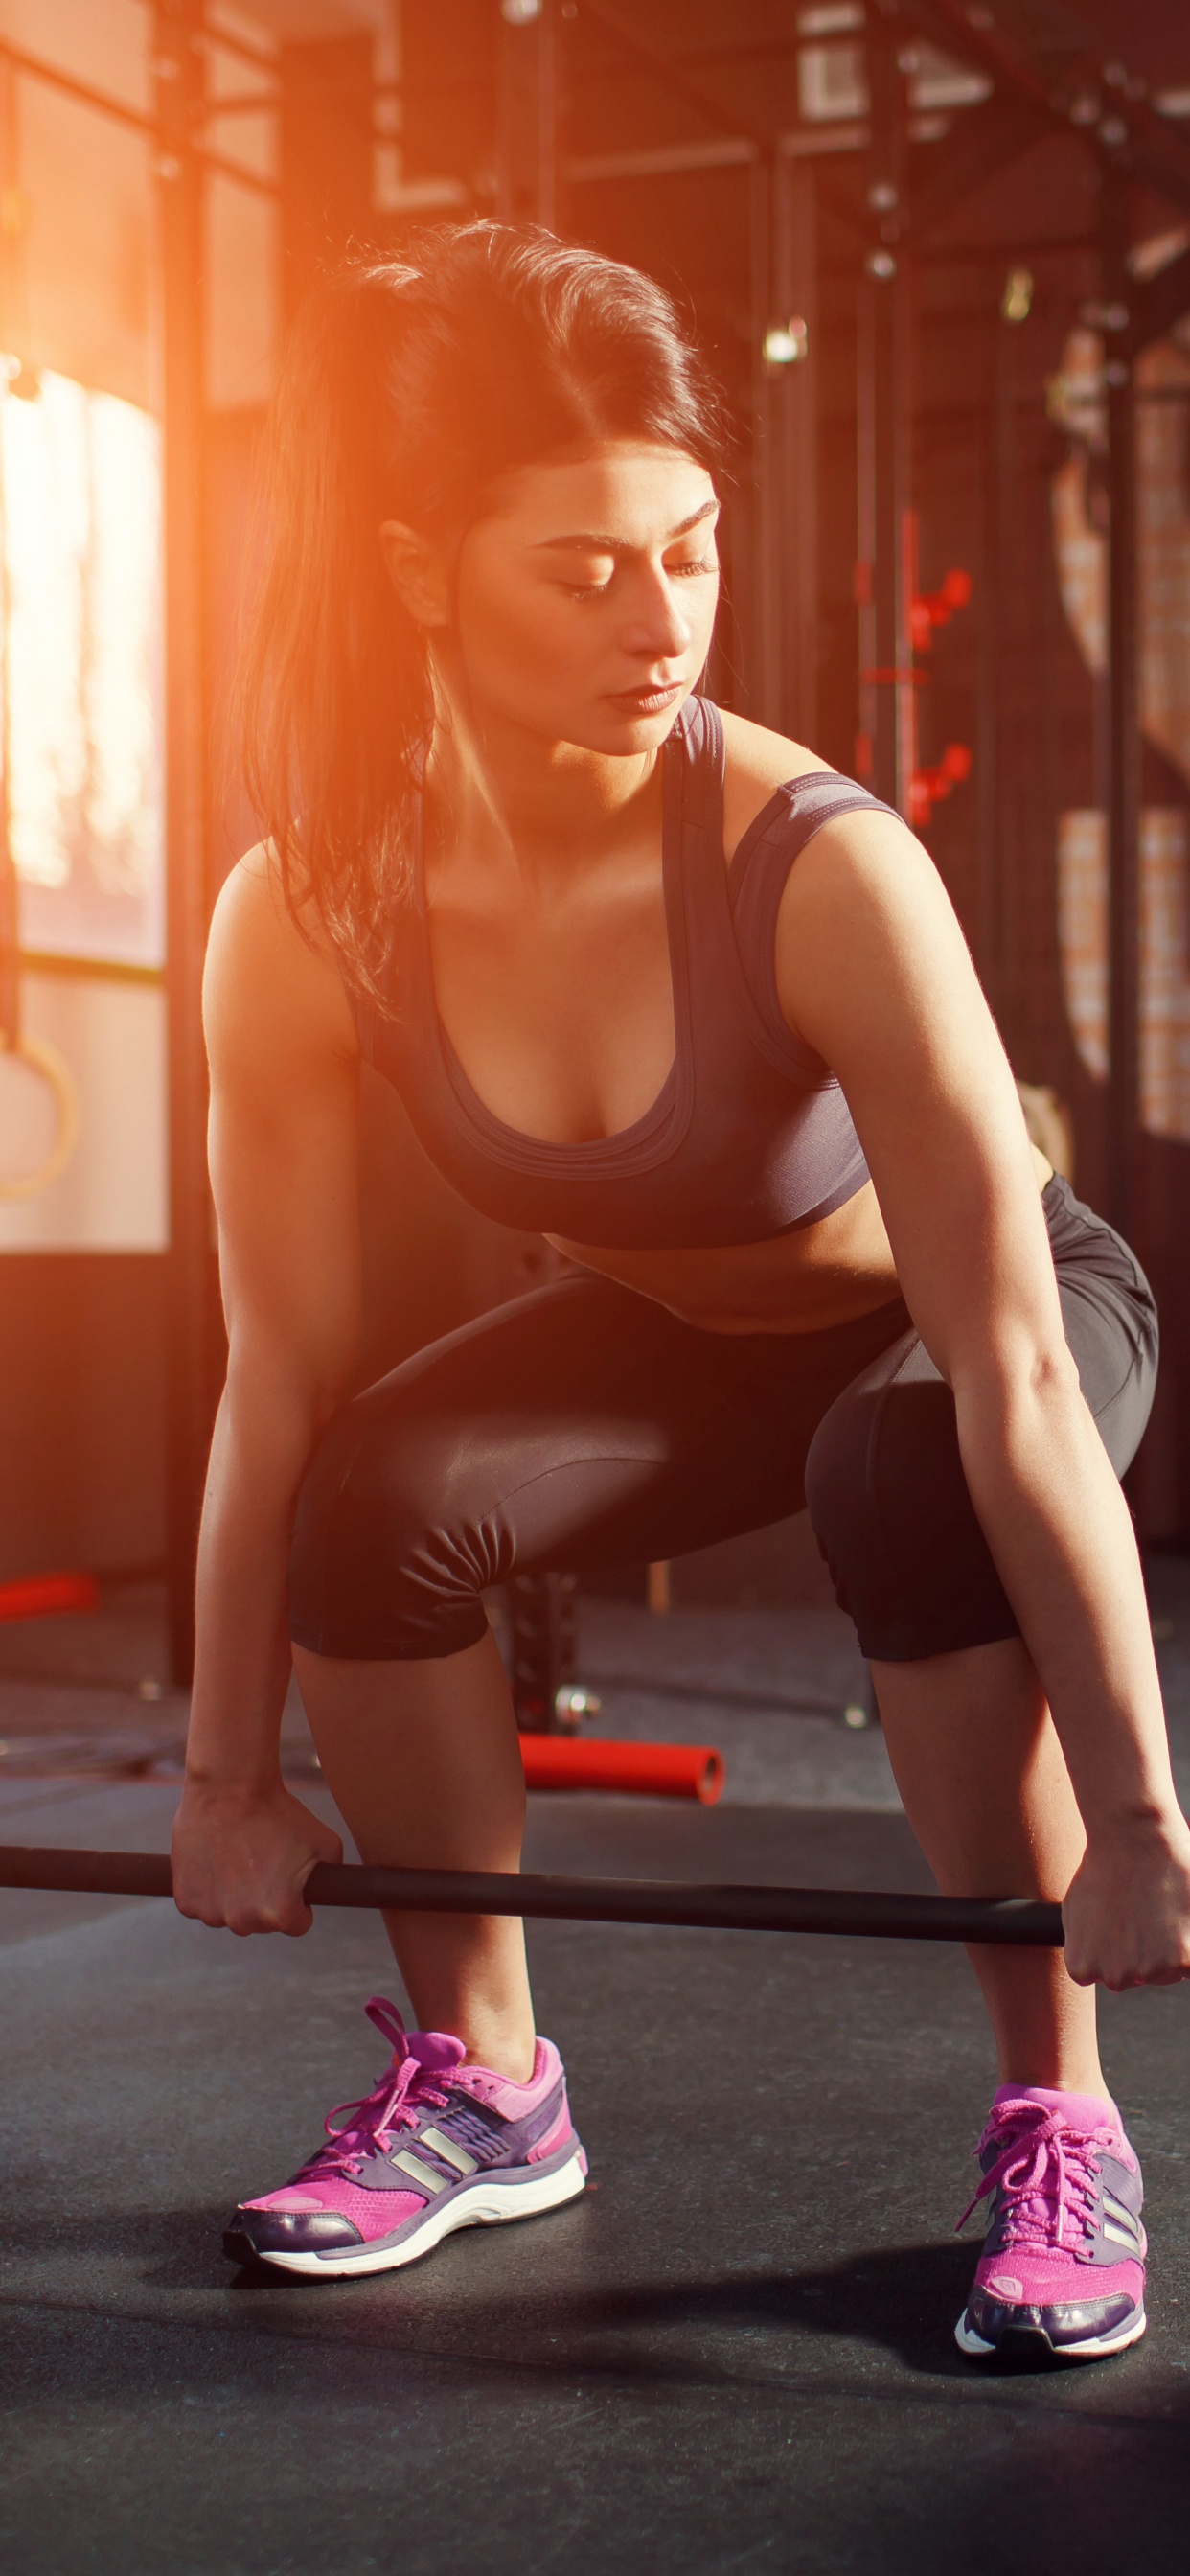 Woman in Black Tank Top and Black Leggings Doing Exercise. Wallpaper in 1242x2688 Resolution